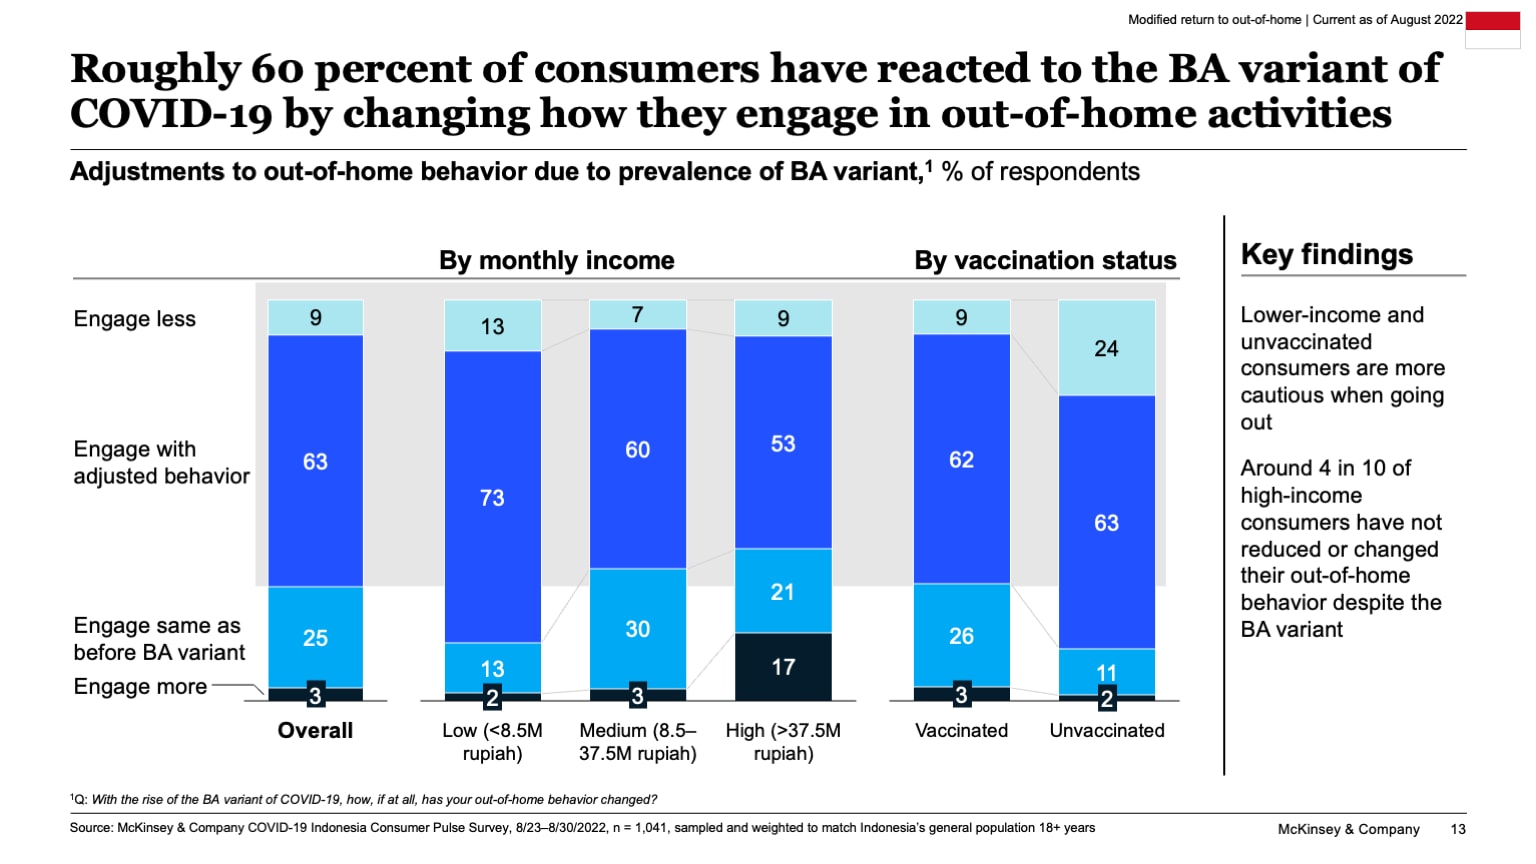 Roughly 60 percent of consumers have reacted to the BA variant of COVID-19 by changing how they engage in out-of-home activities